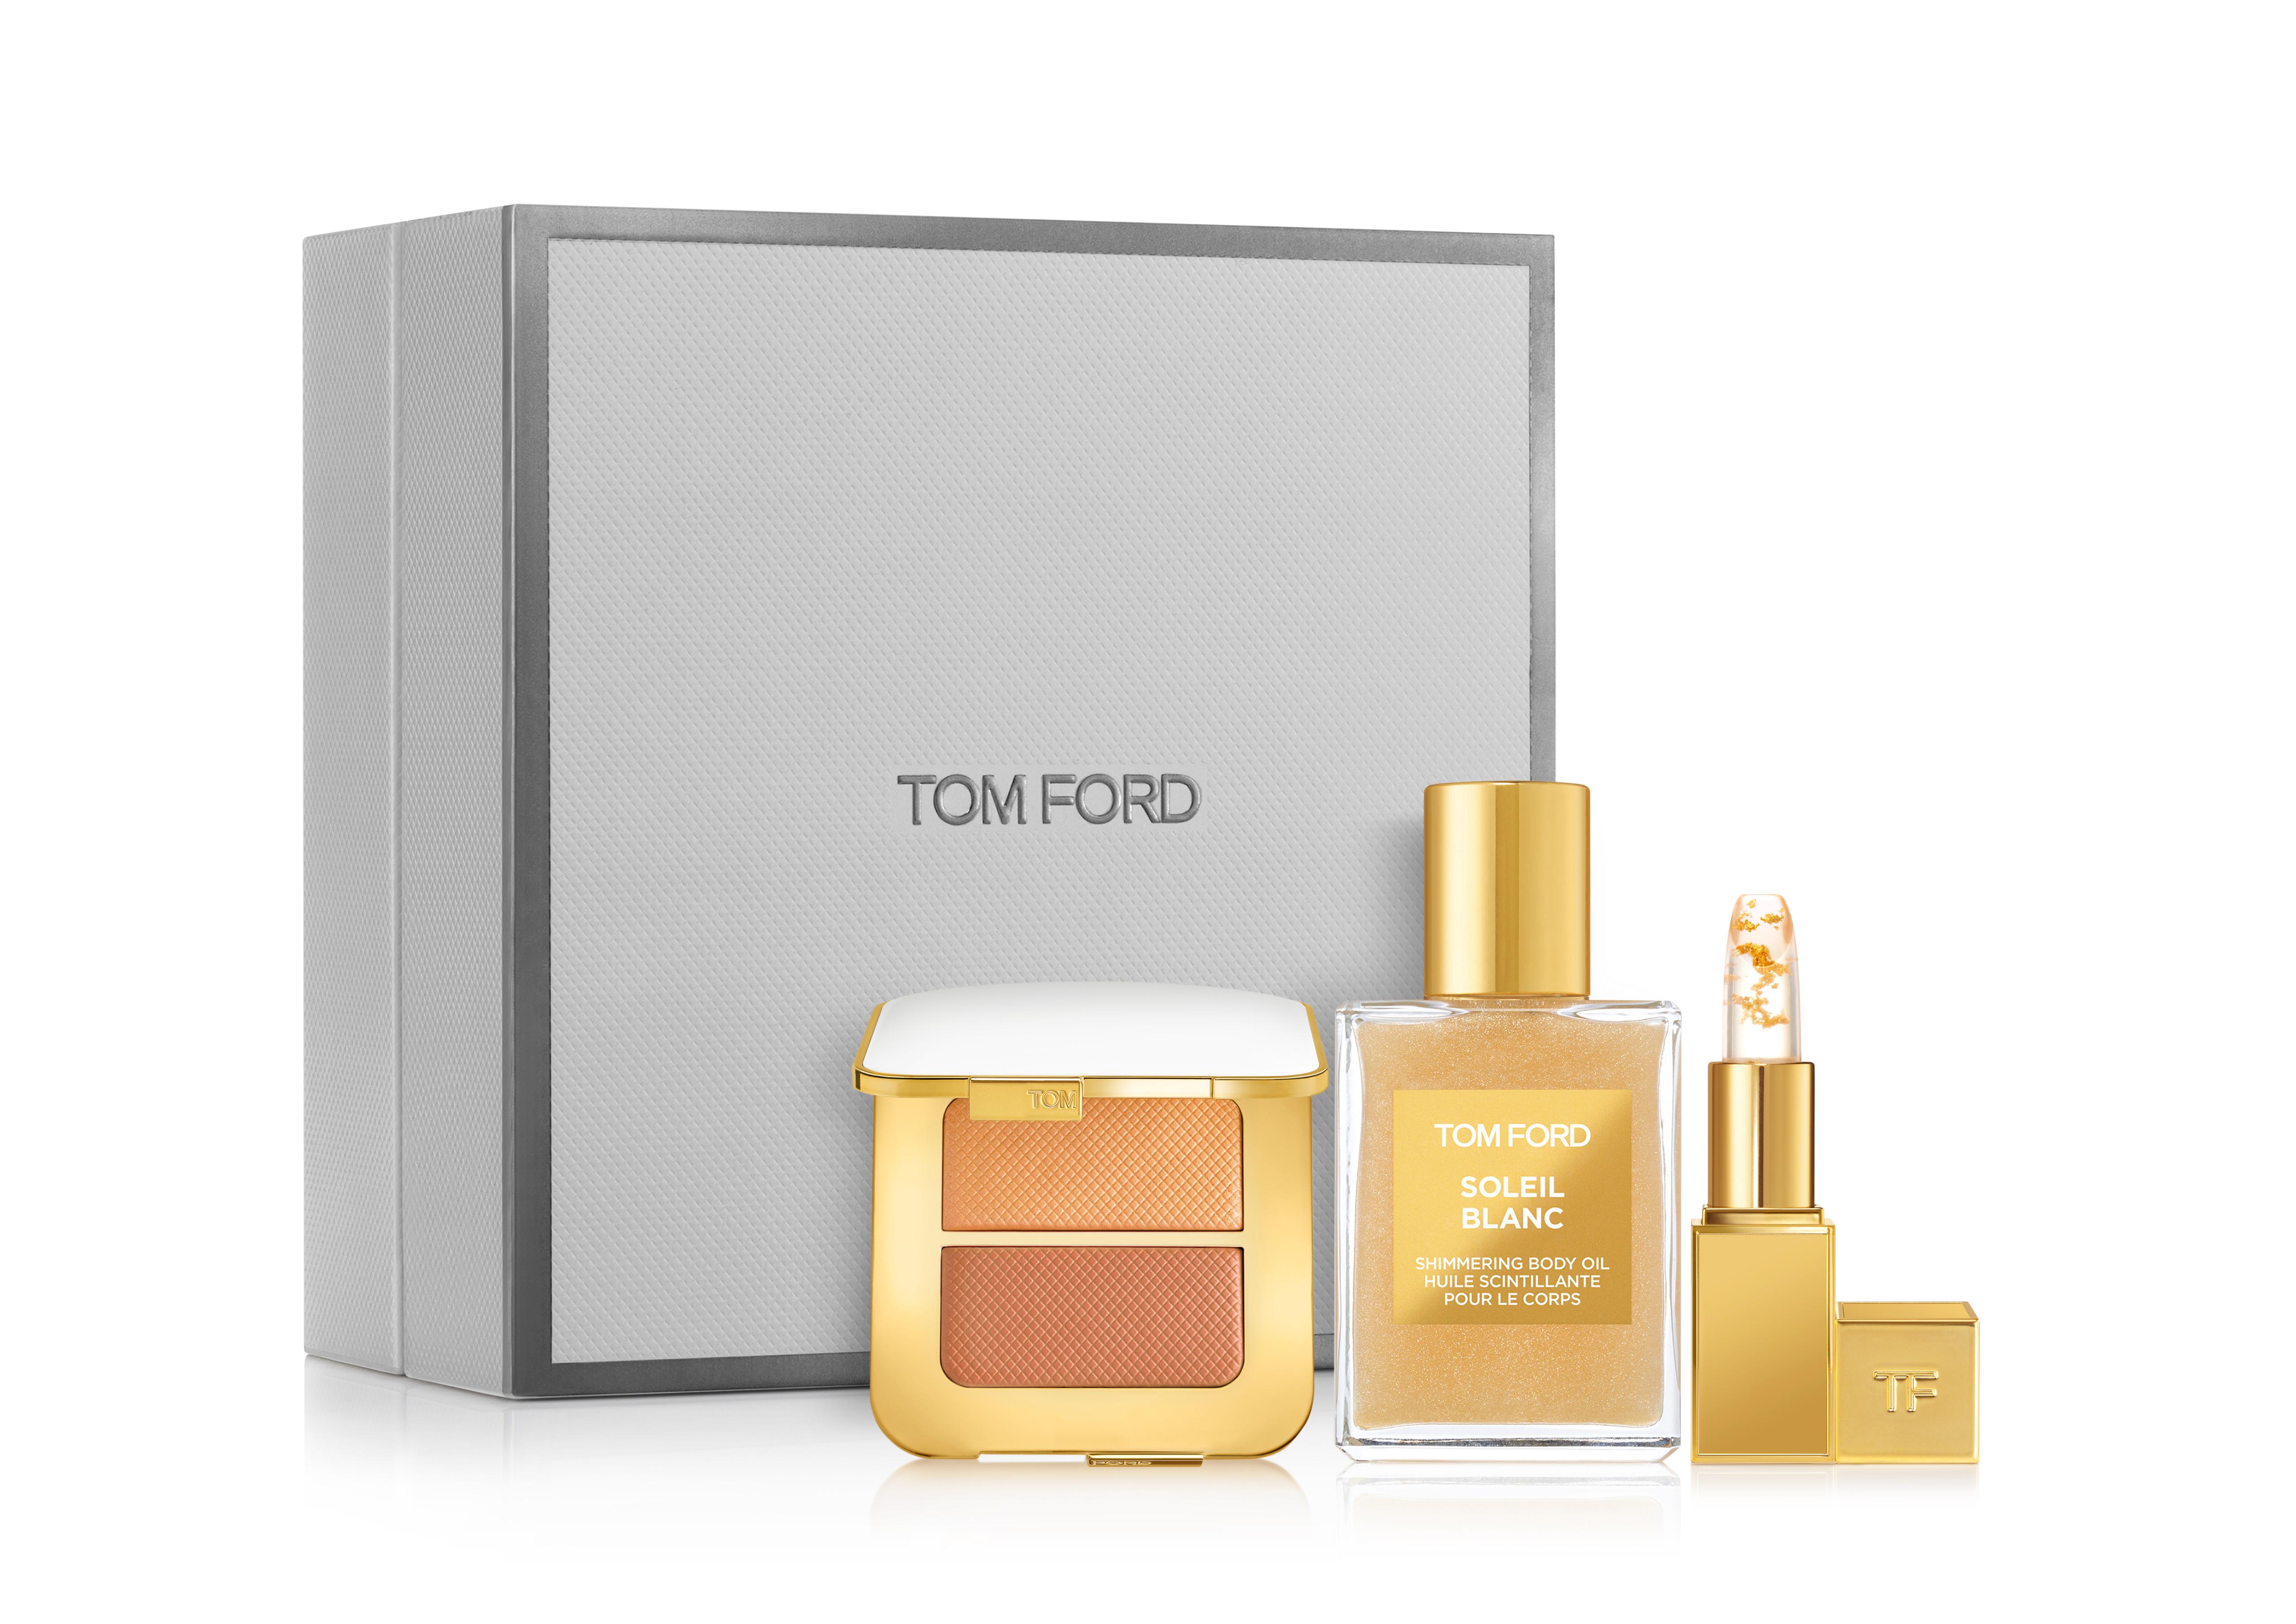 Tom Ford Soleil shimmering body oil duo 